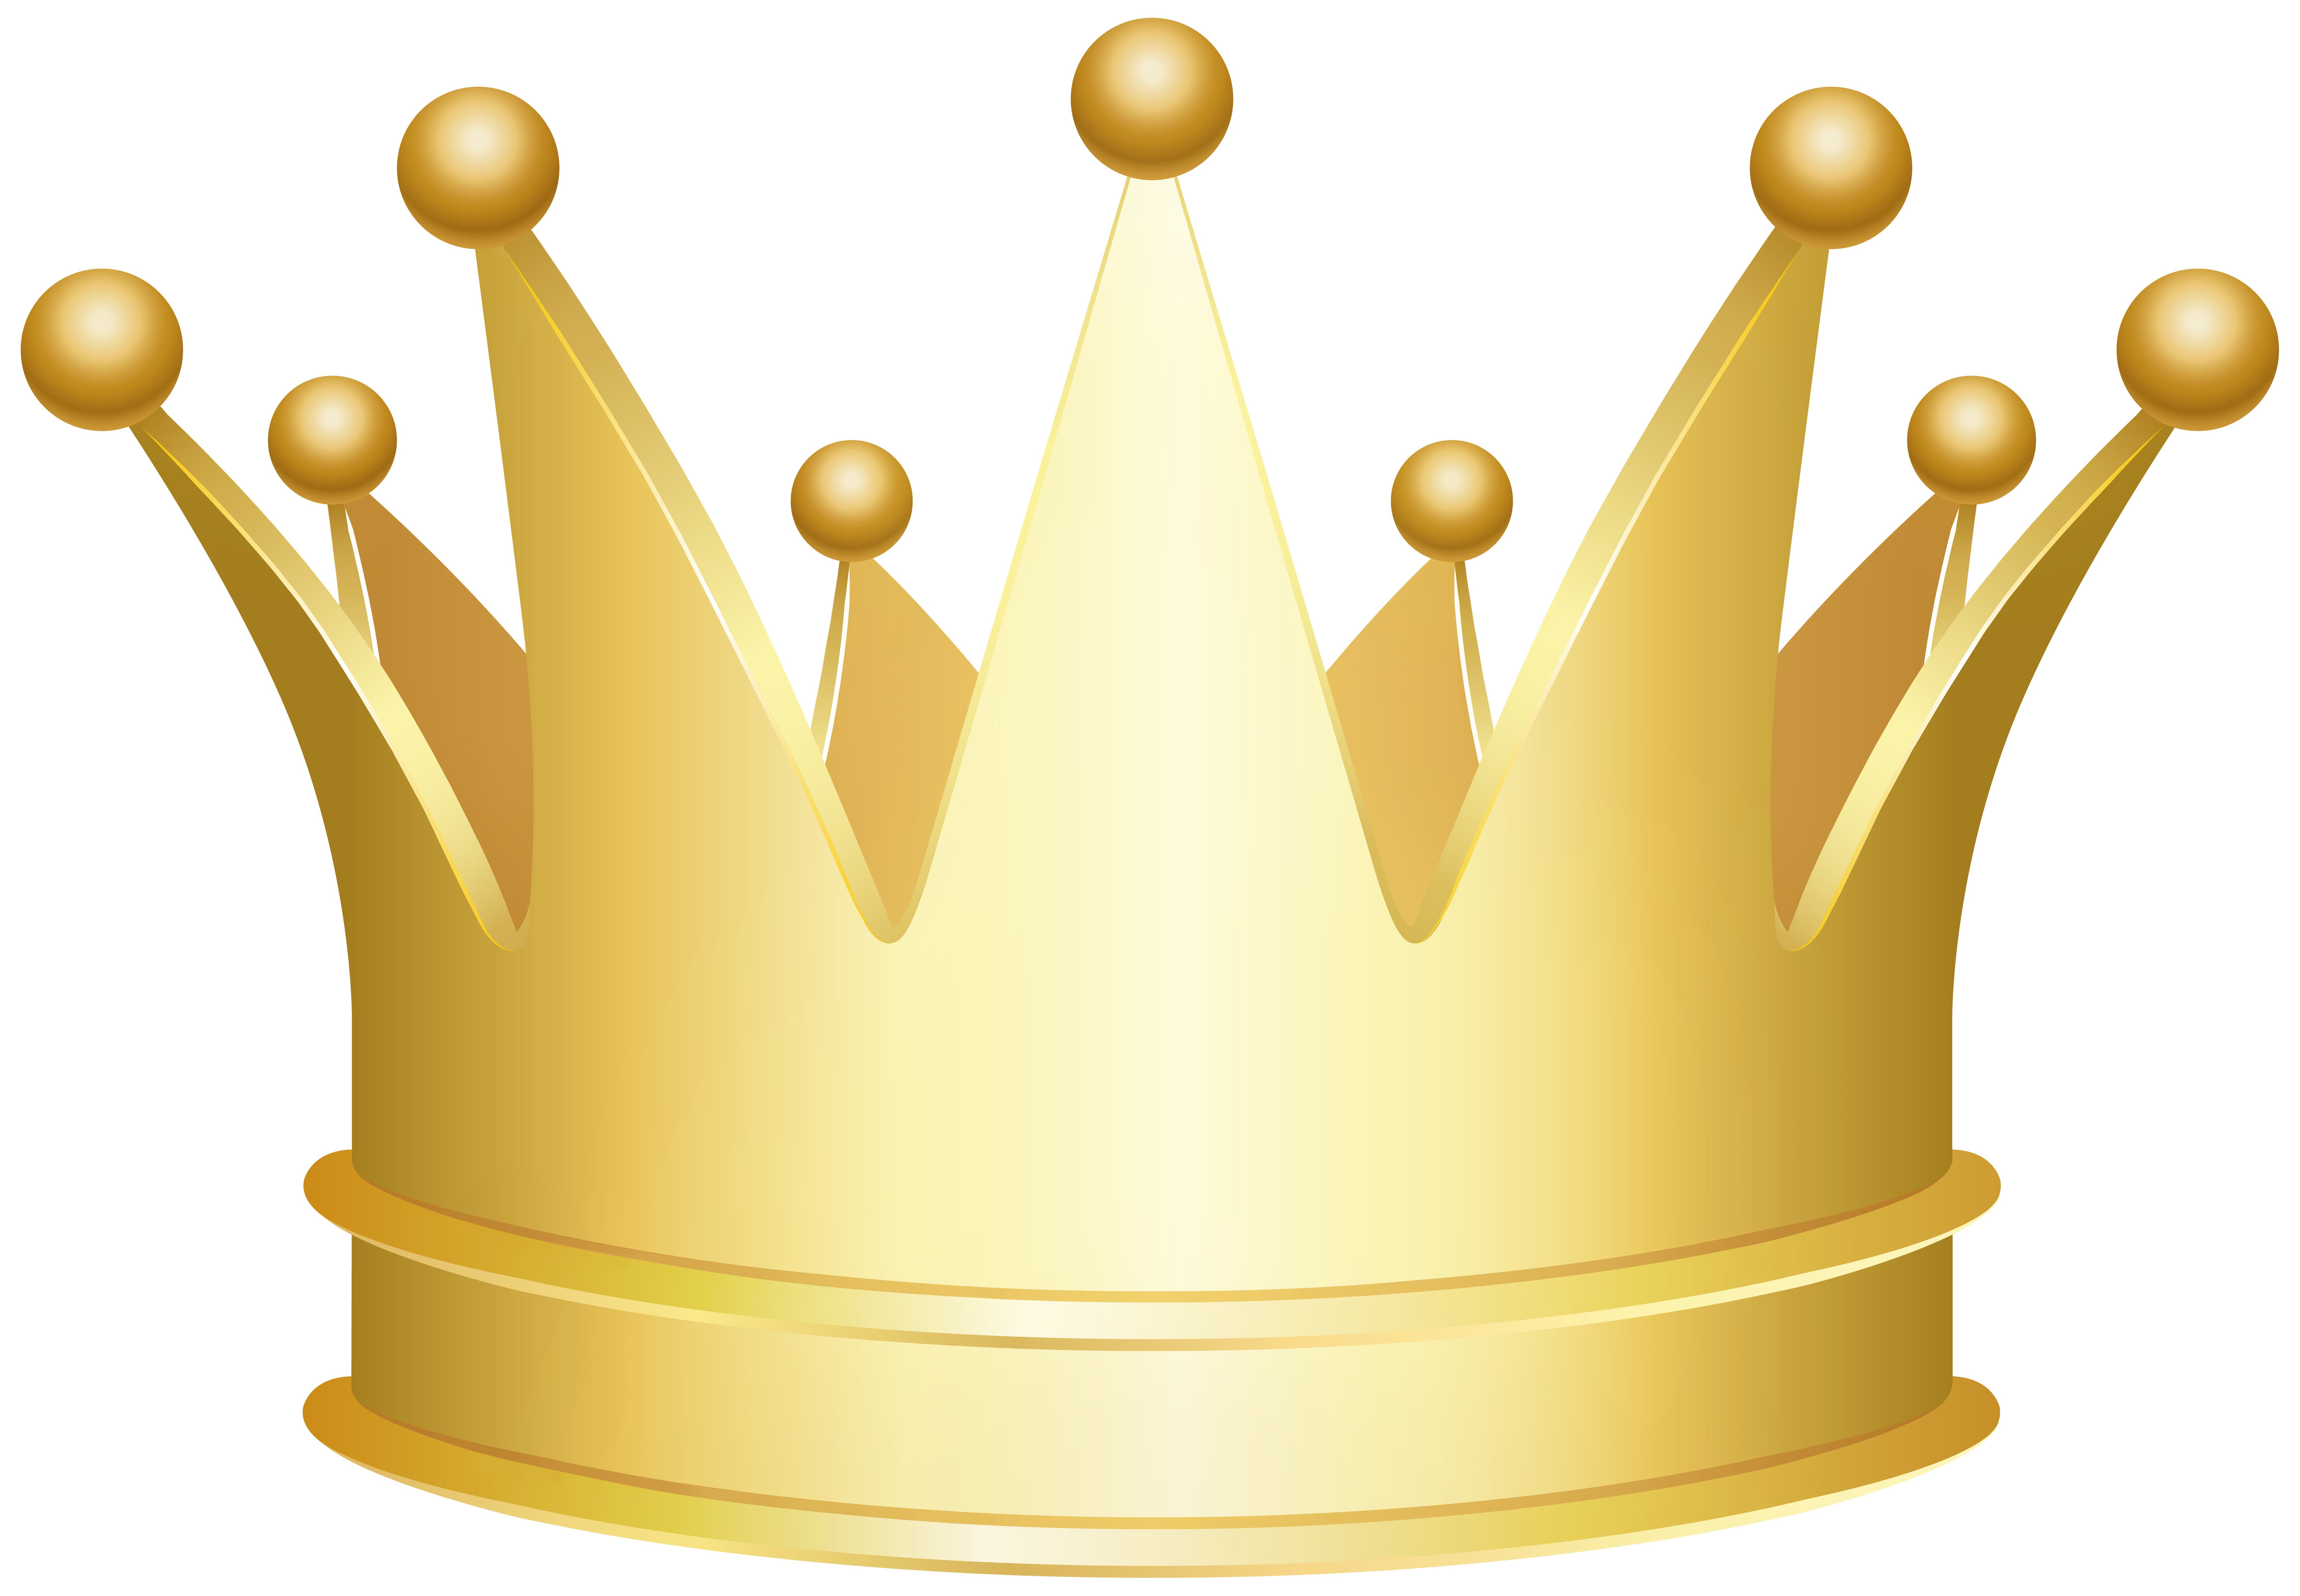 Golden Crown PNG Transparent Clipart​ | Gallery Yopriceville - High-Quality  Free Images and Transparent PNG Clipart